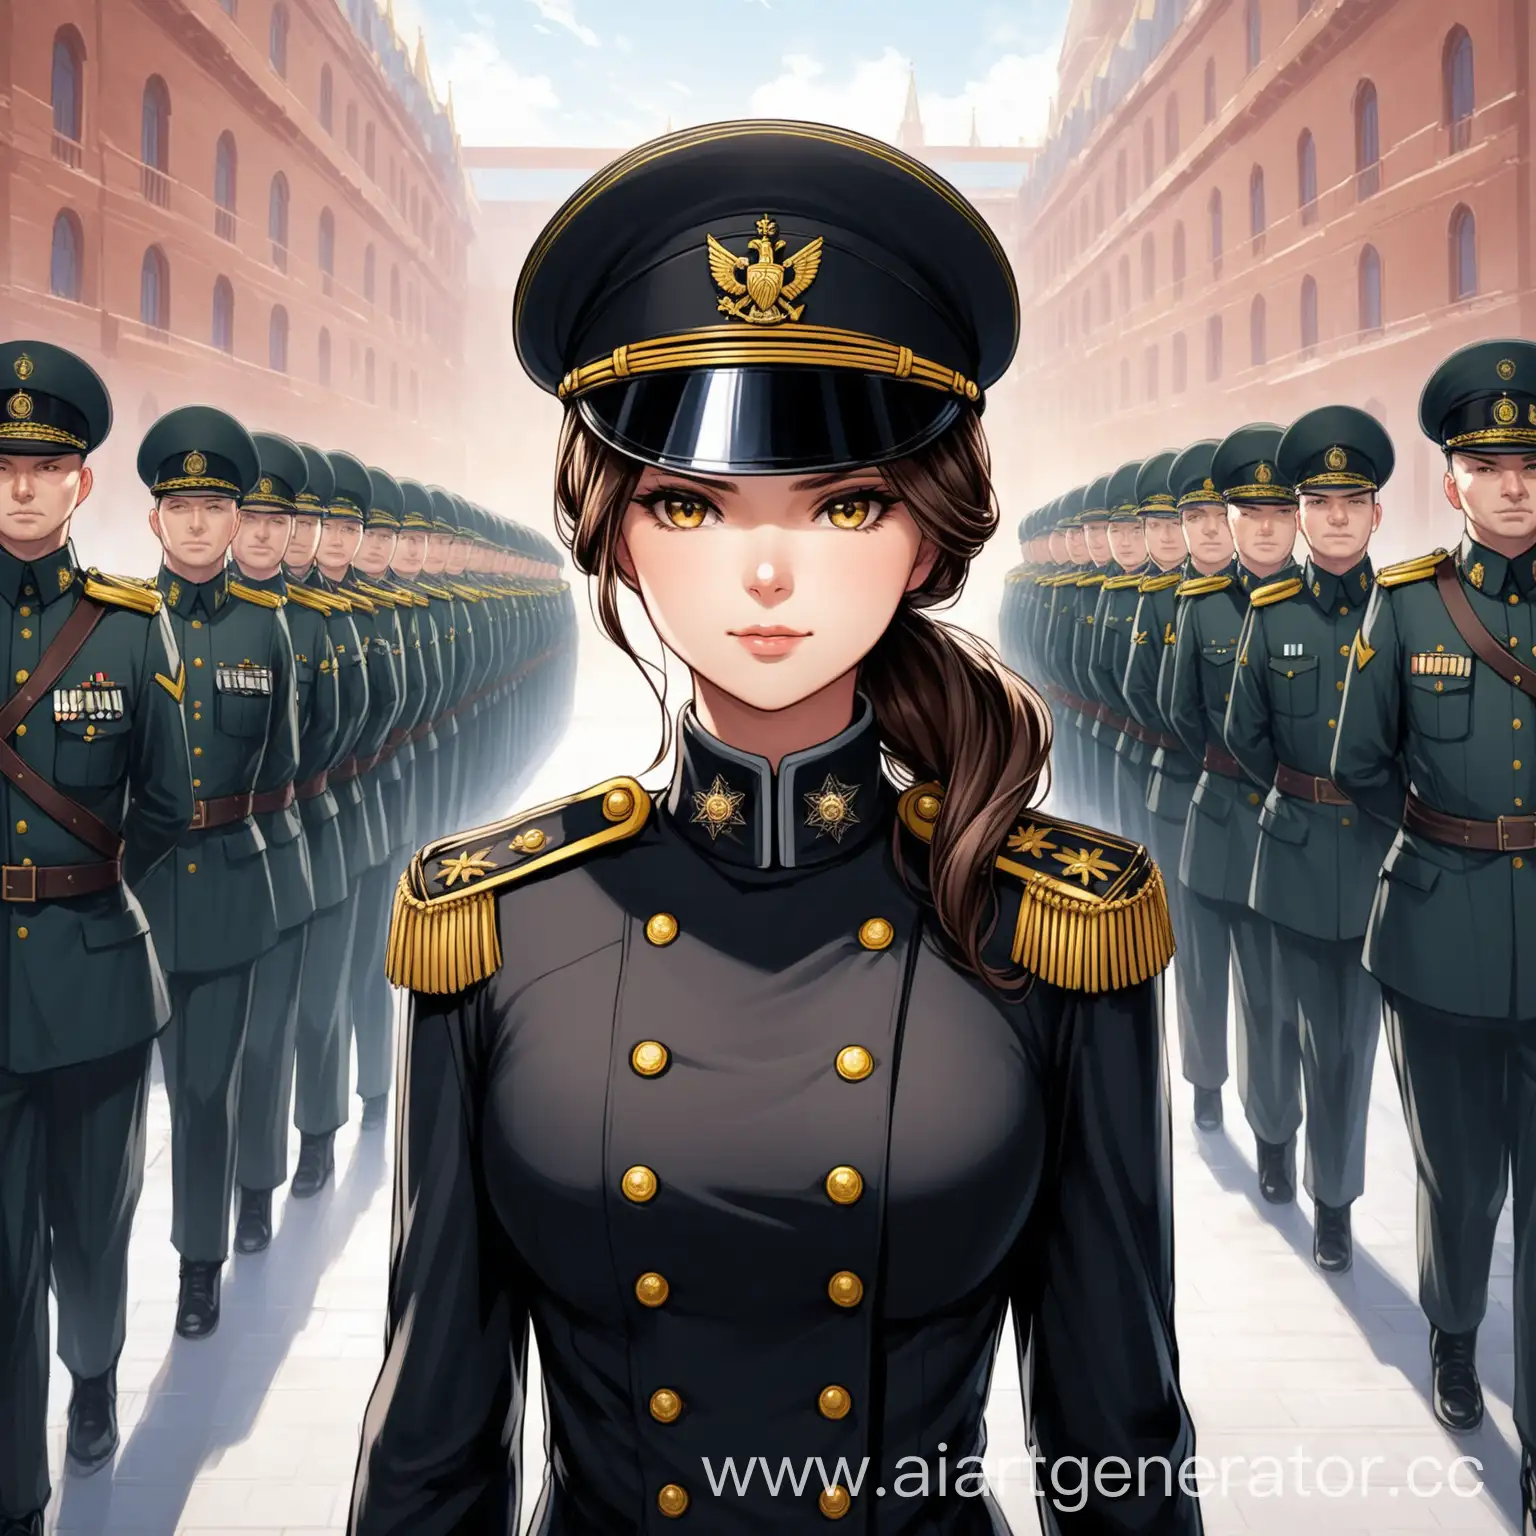 CommanderinChief-Victoria-Leading-the-Russian-Imperial-Army-with-Precision-and-Authority